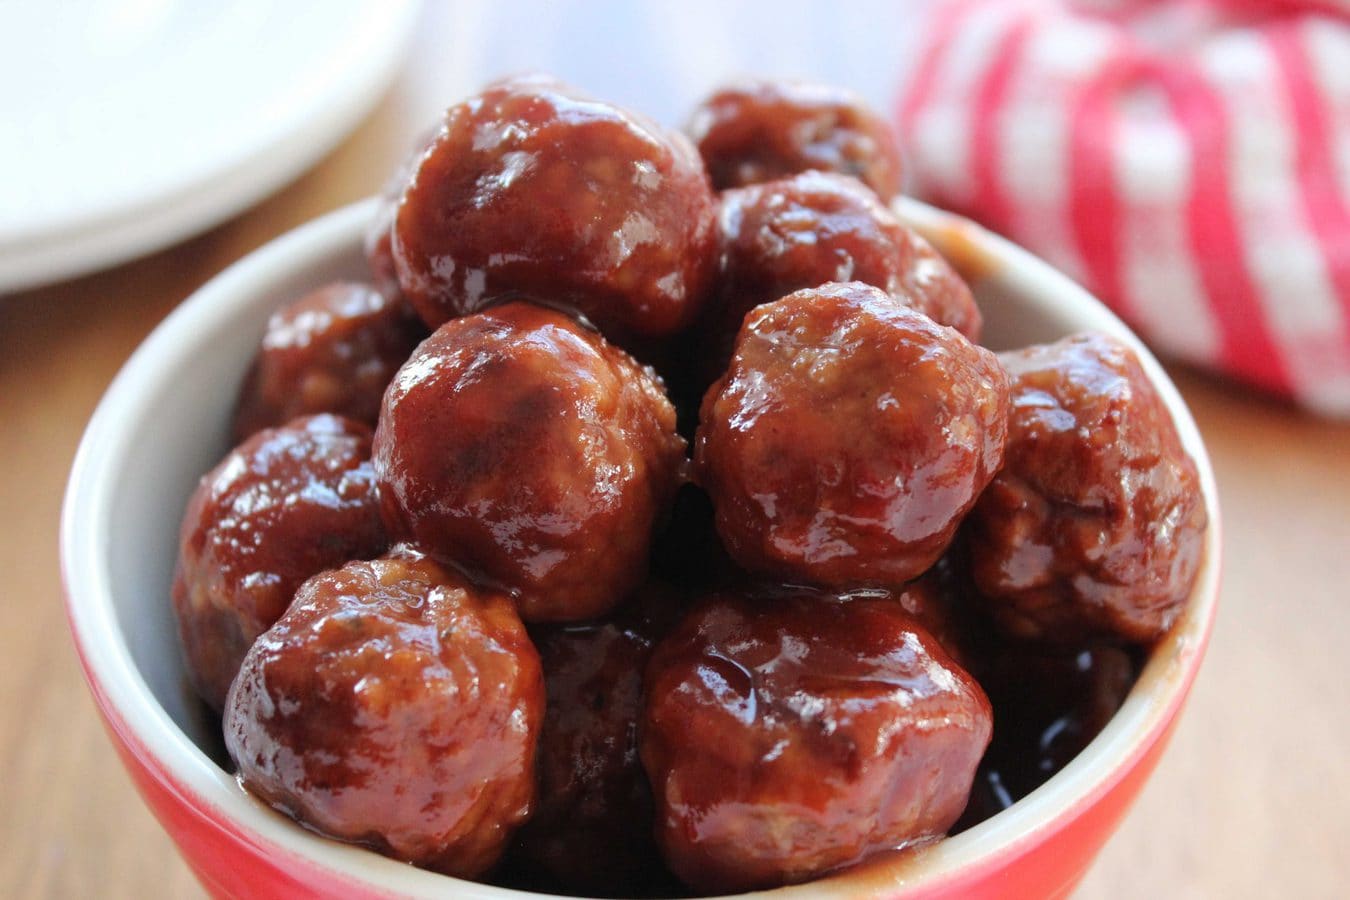 a closeup of meatballs in a chili and grape jelly sauce with a red tea towel in the background.